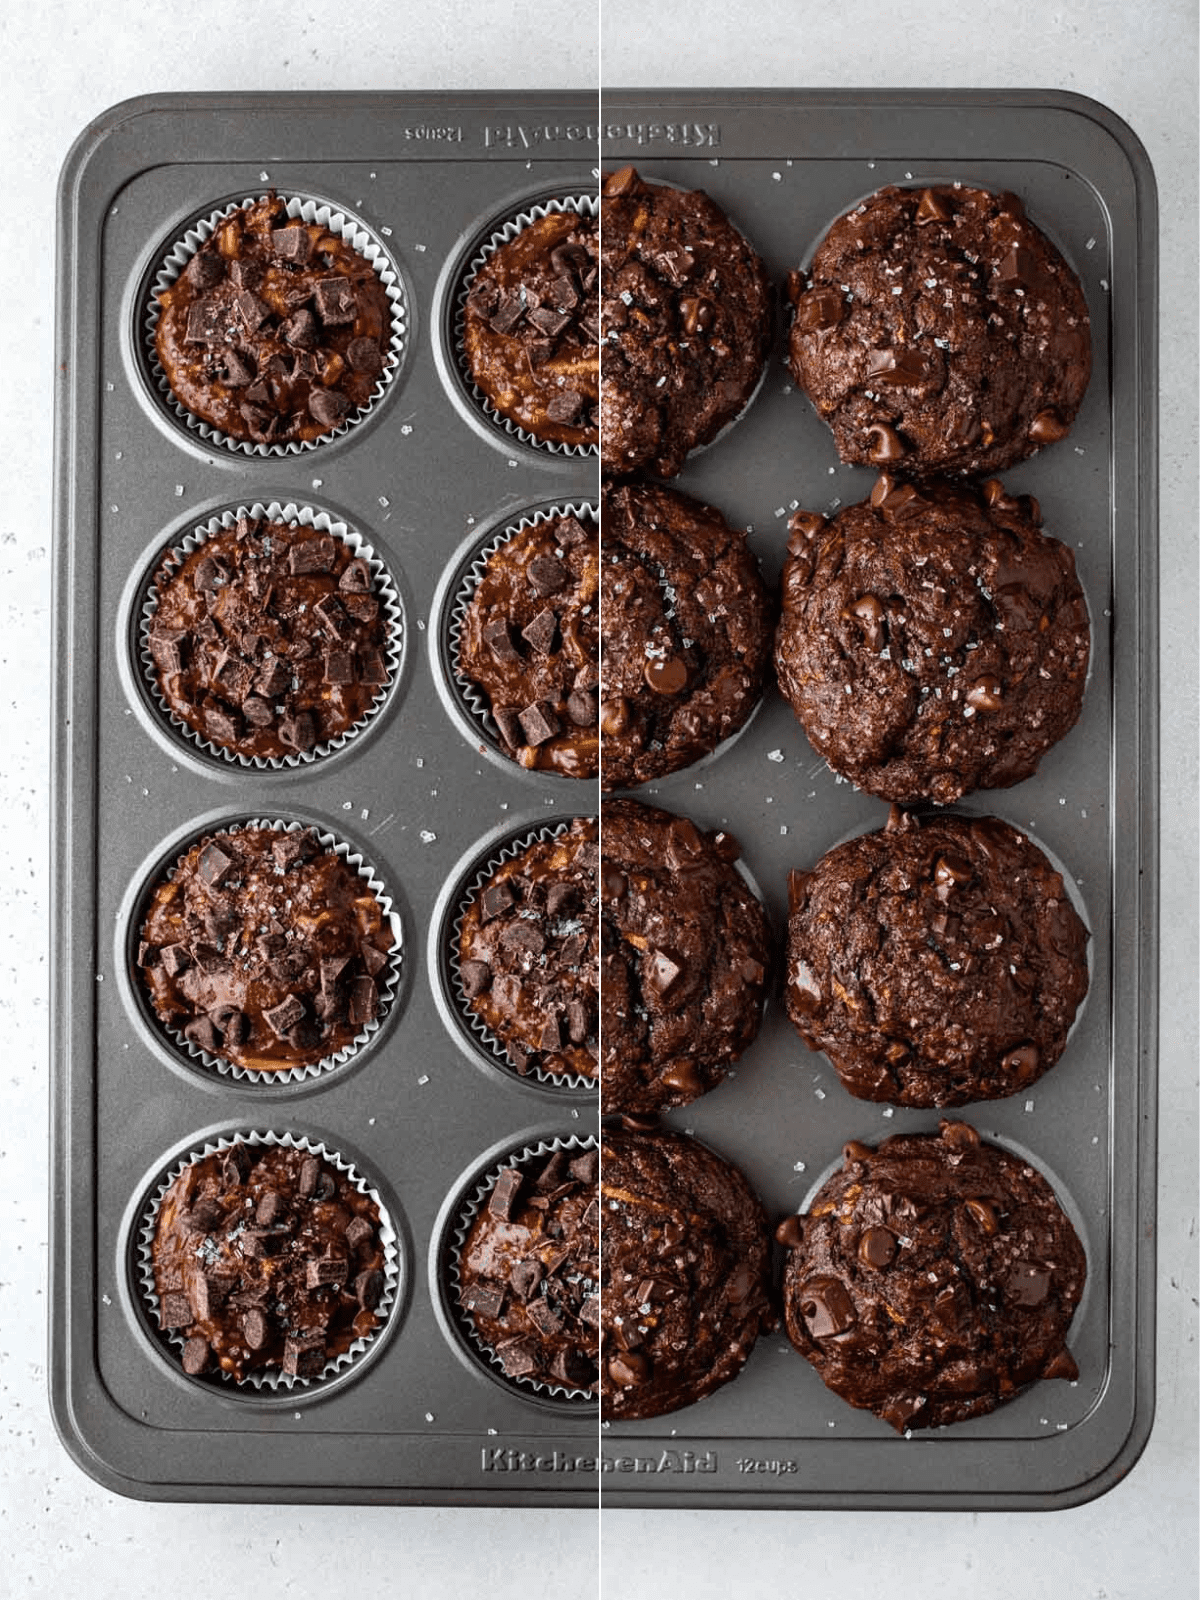 Chocolate zucchini muffins in a pan before and after they've been baked